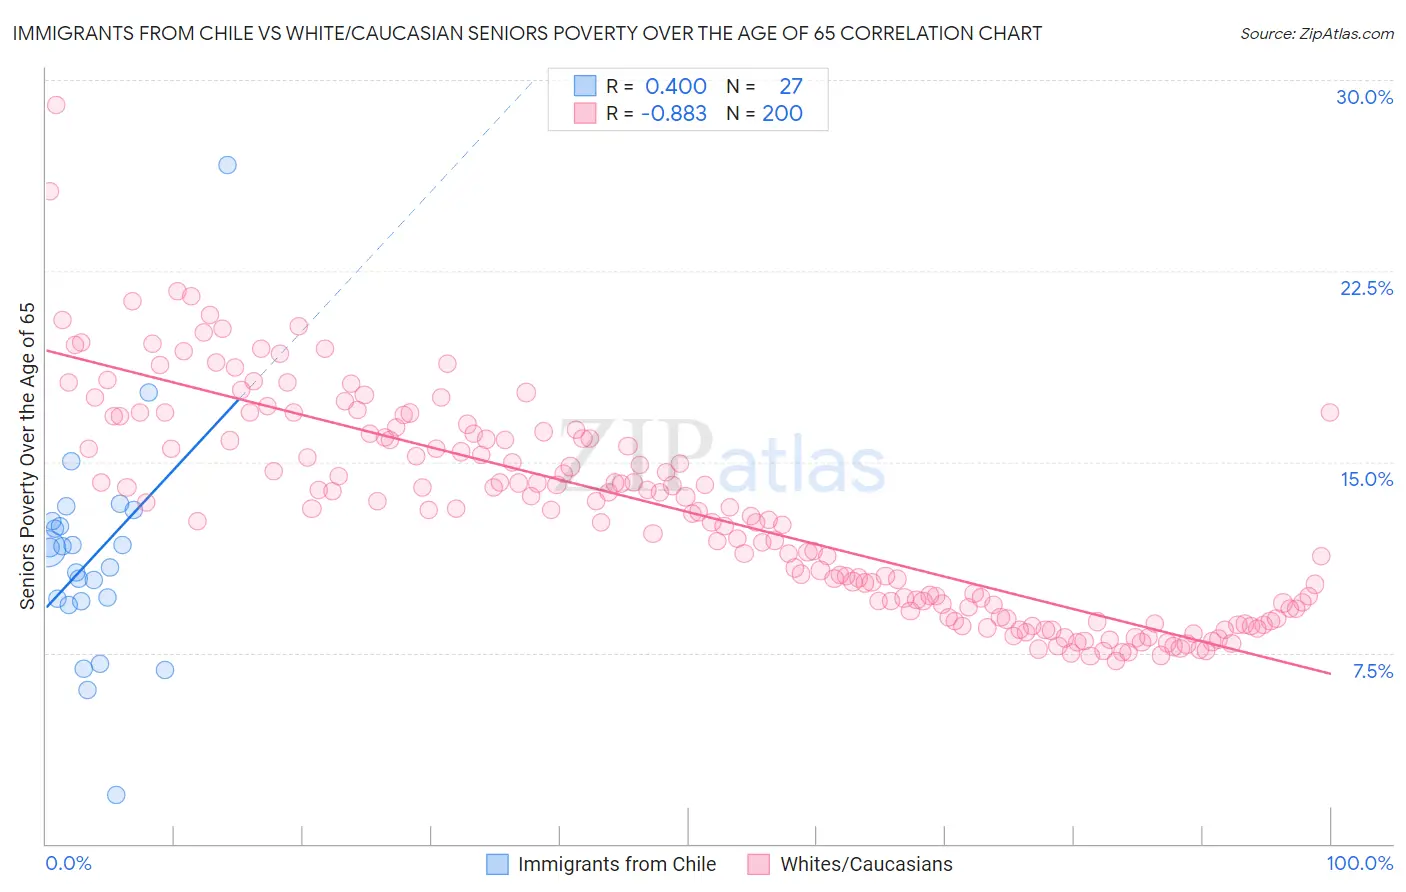 Immigrants from Chile vs White/Caucasian Seniors Poverty Over the Age of 65